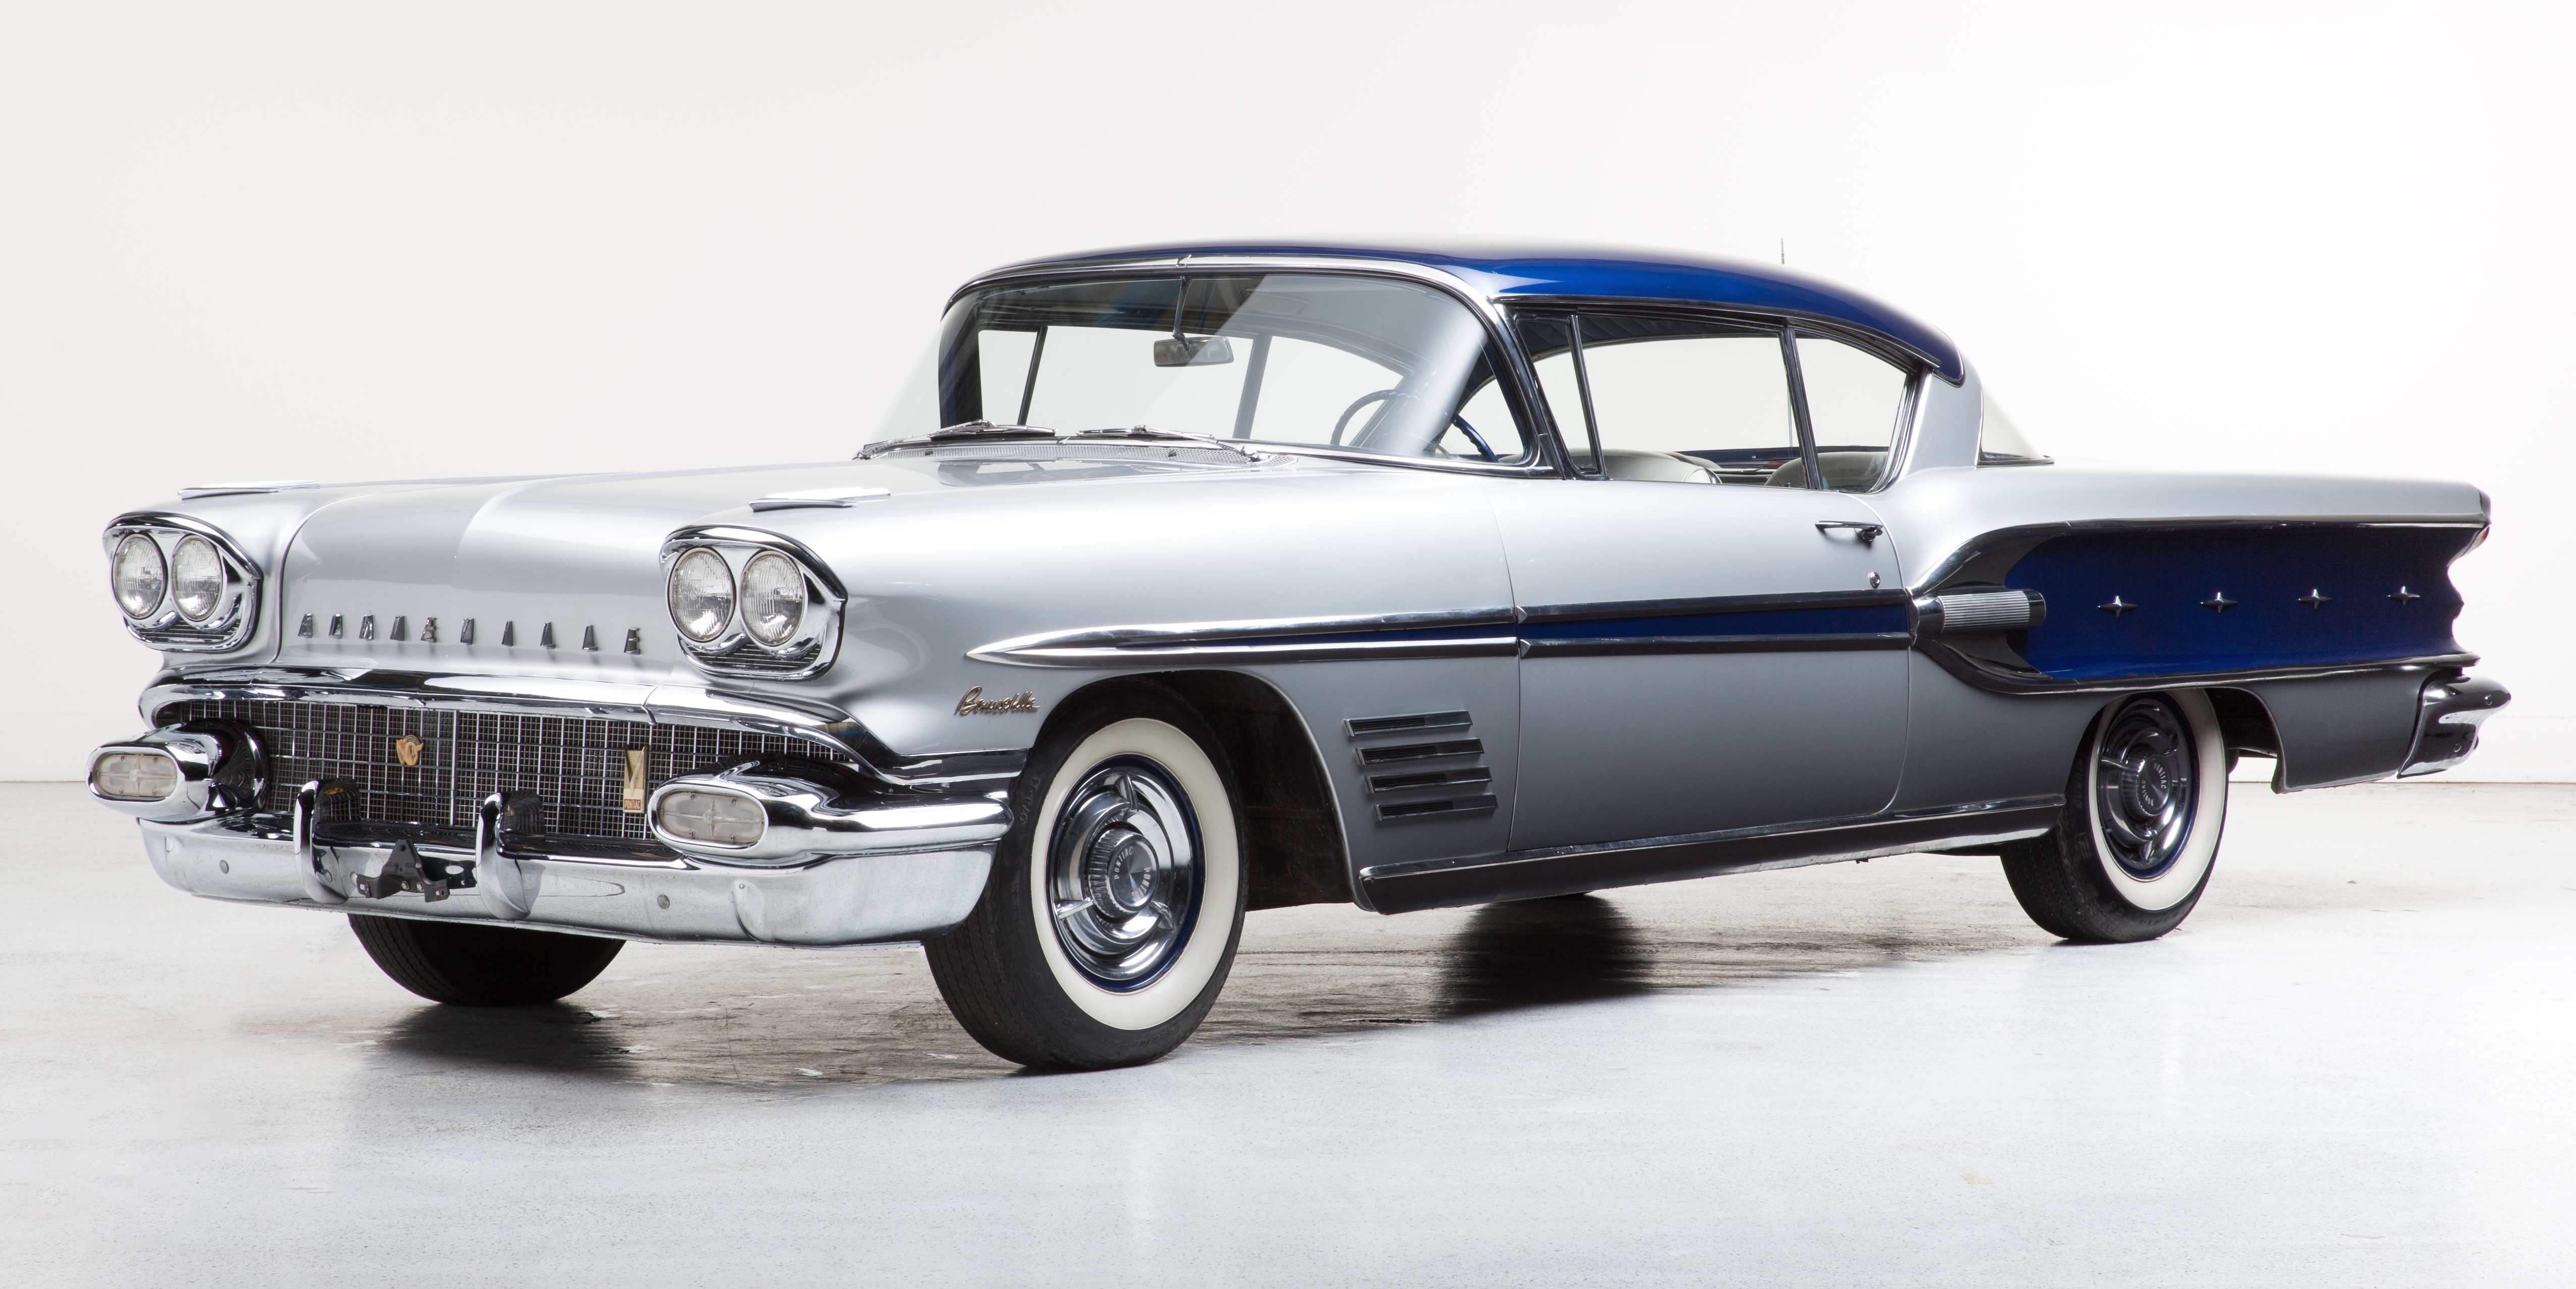 57 Buick, '58 Bonneville set pace at American classic car auction in ...